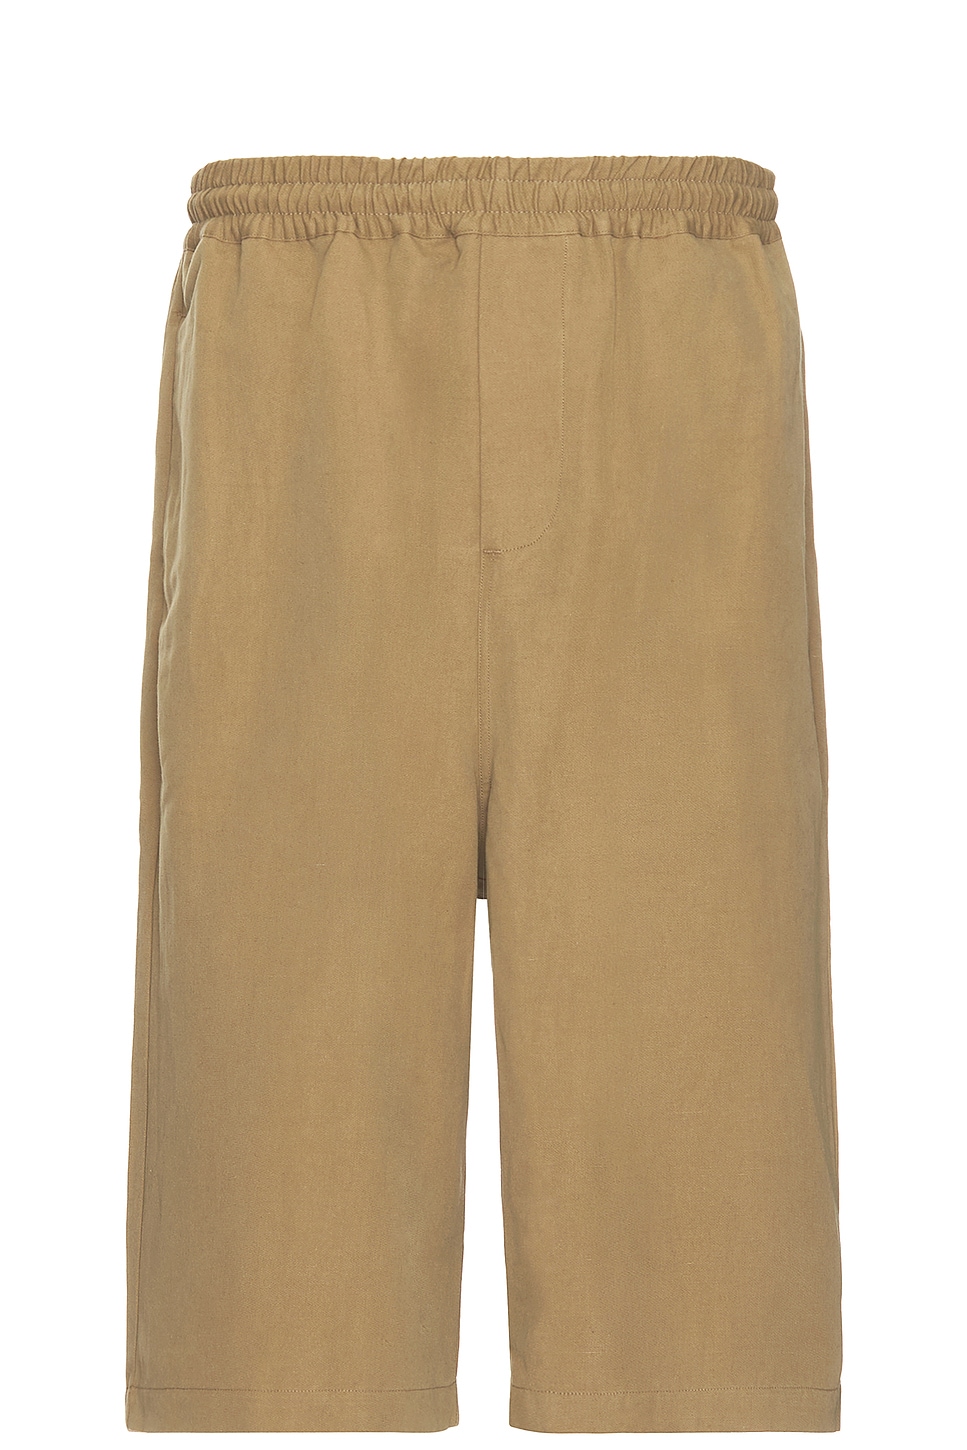 Image 1 of Willy Chavarria Kendrick Short in Khaki